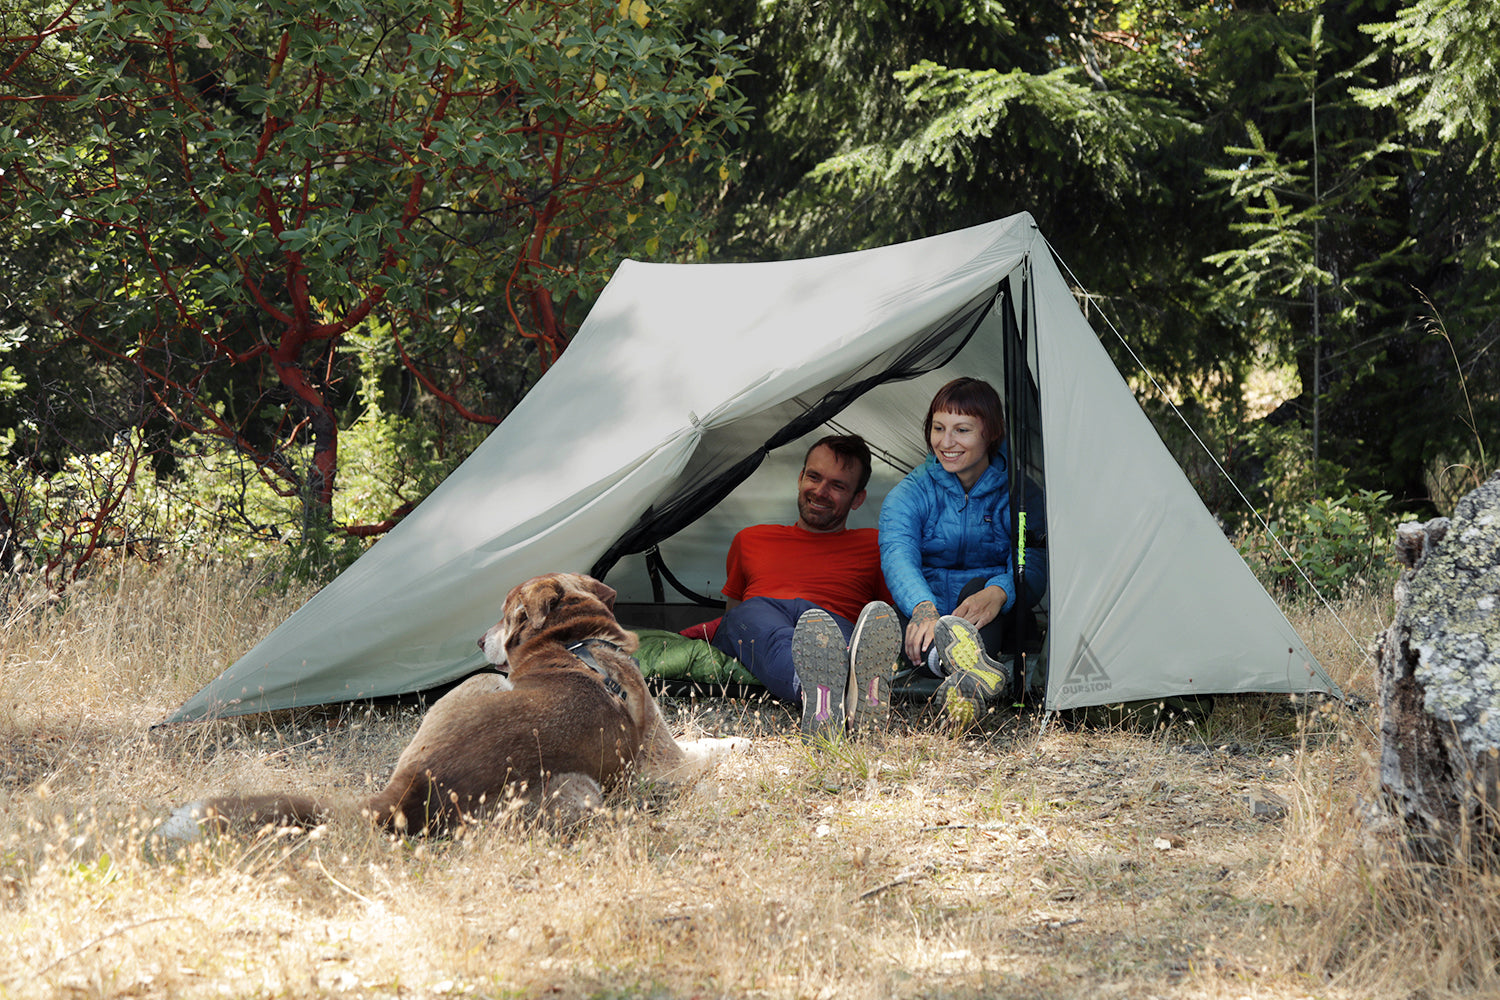 Durston Gear X-Mid 2 tent for 2P trekking pole ultralight shelter designed by Dan Durston for thru-hikes and PCT